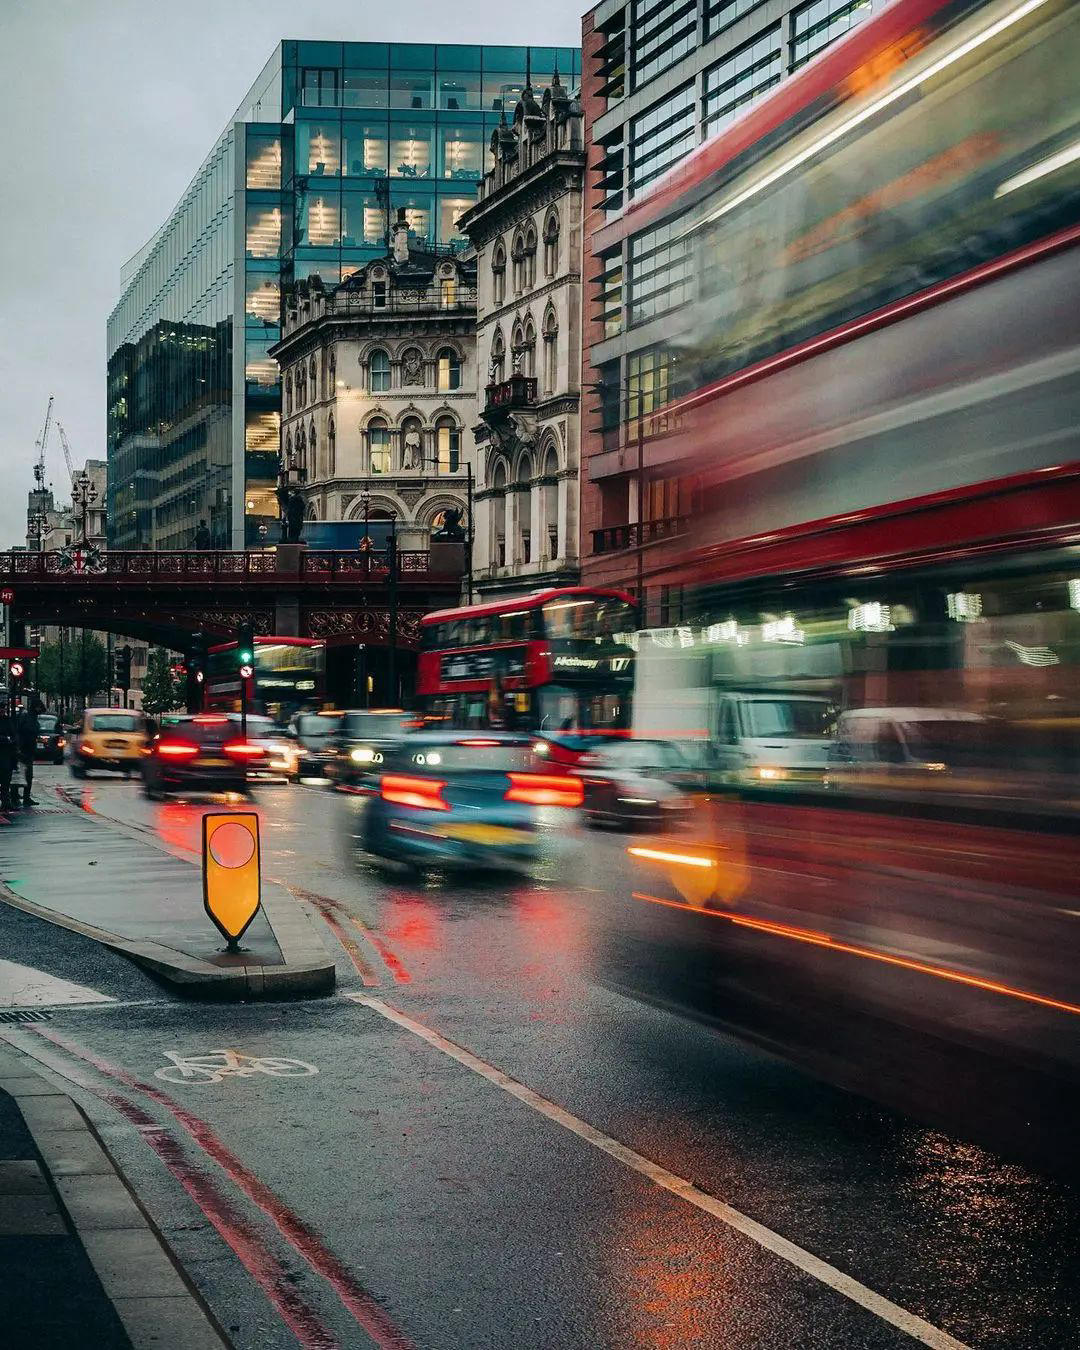 London Enthusiast 🇬🇧 - Finally some rain and this fantastic photo of the Holborn Viaduct